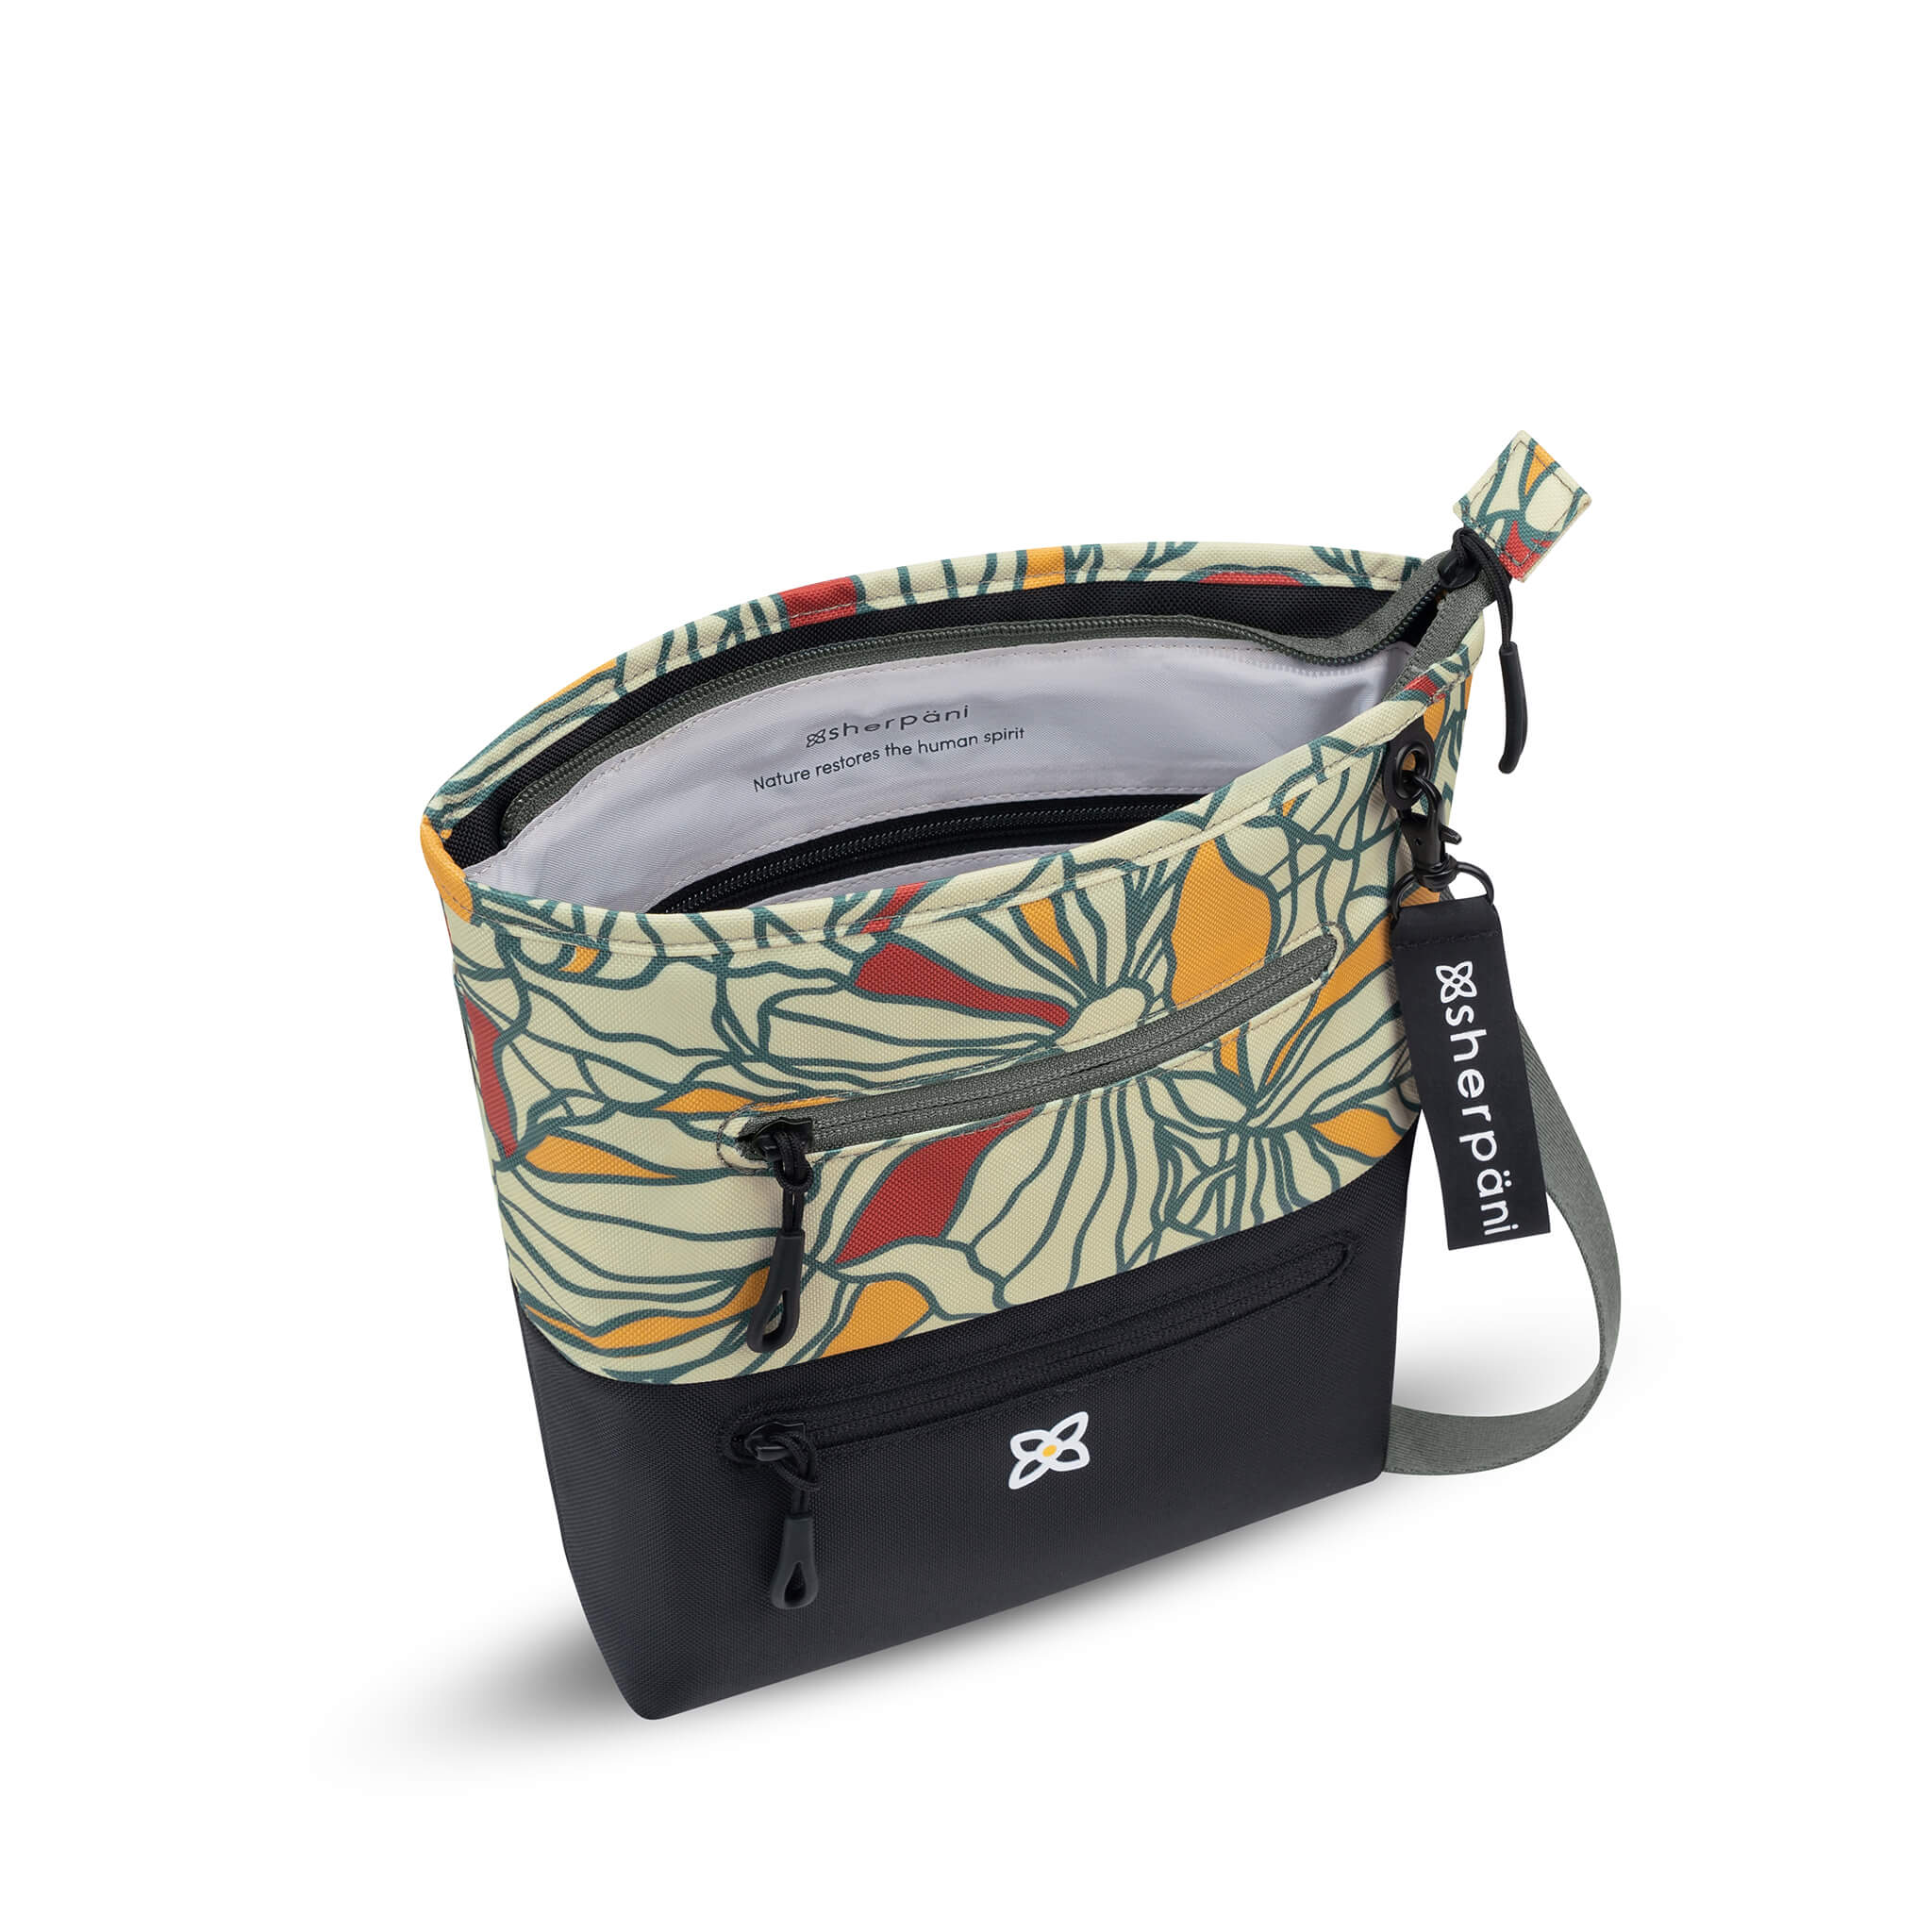 Inside view of Sherpani small crossbody bag, the Sadie in Fiori. The zipper of the main bag compartment is open to reveal internal pockets and text that says "Sherpani: Nature restores the human spirit." 